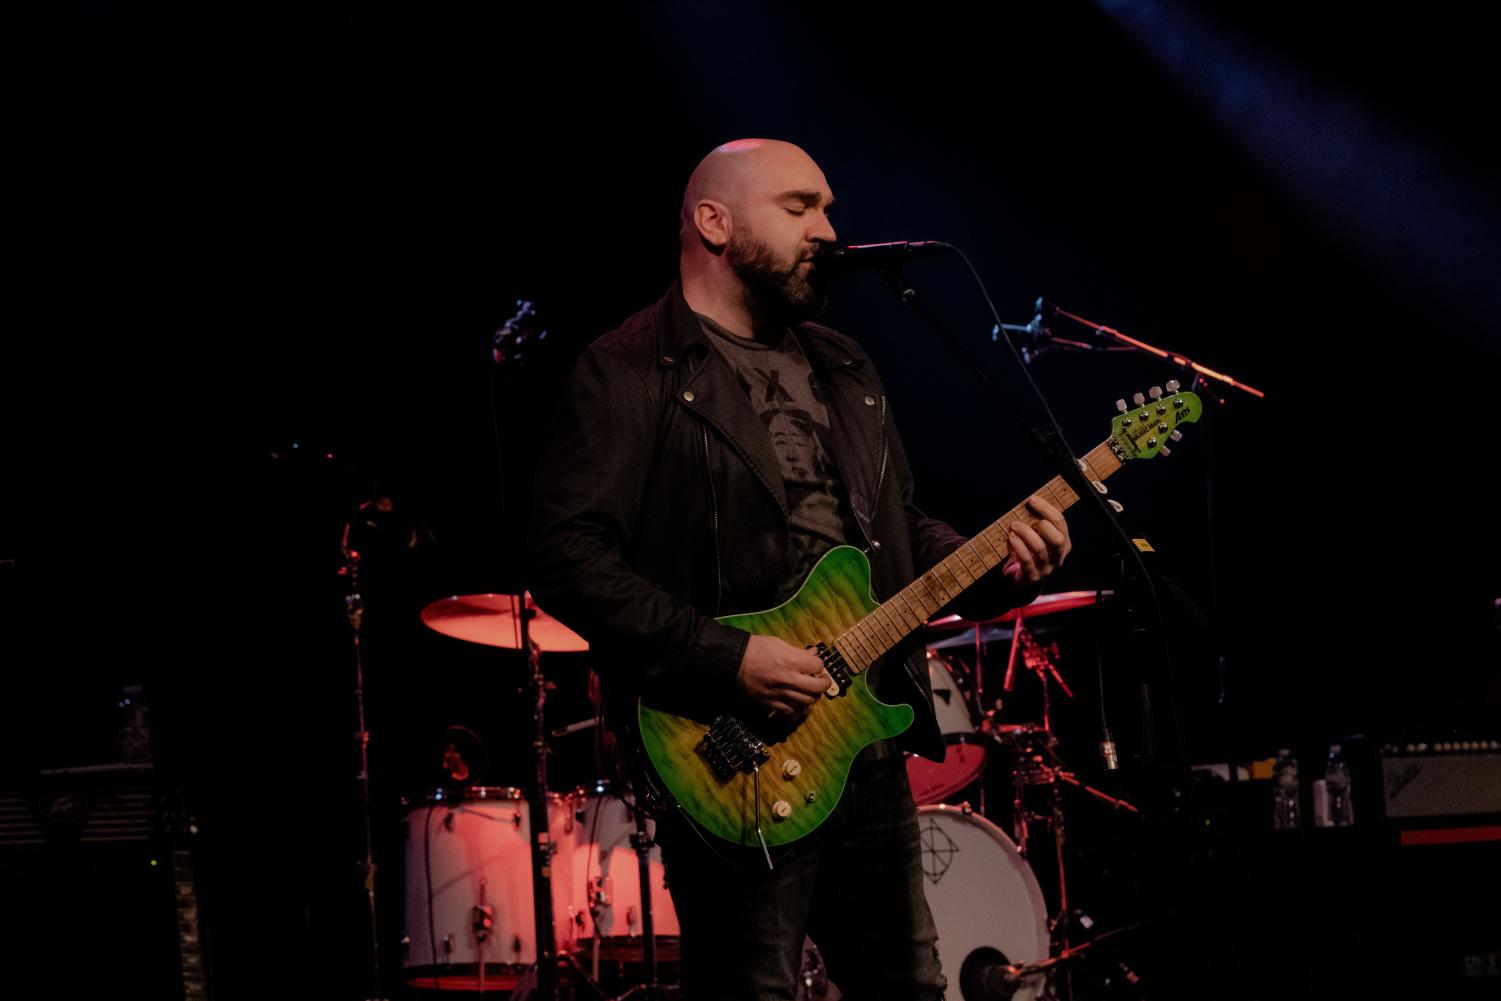 Blue+Oyster+Cult+at+College+Street+Music+Hall+%28PHOTOS%29